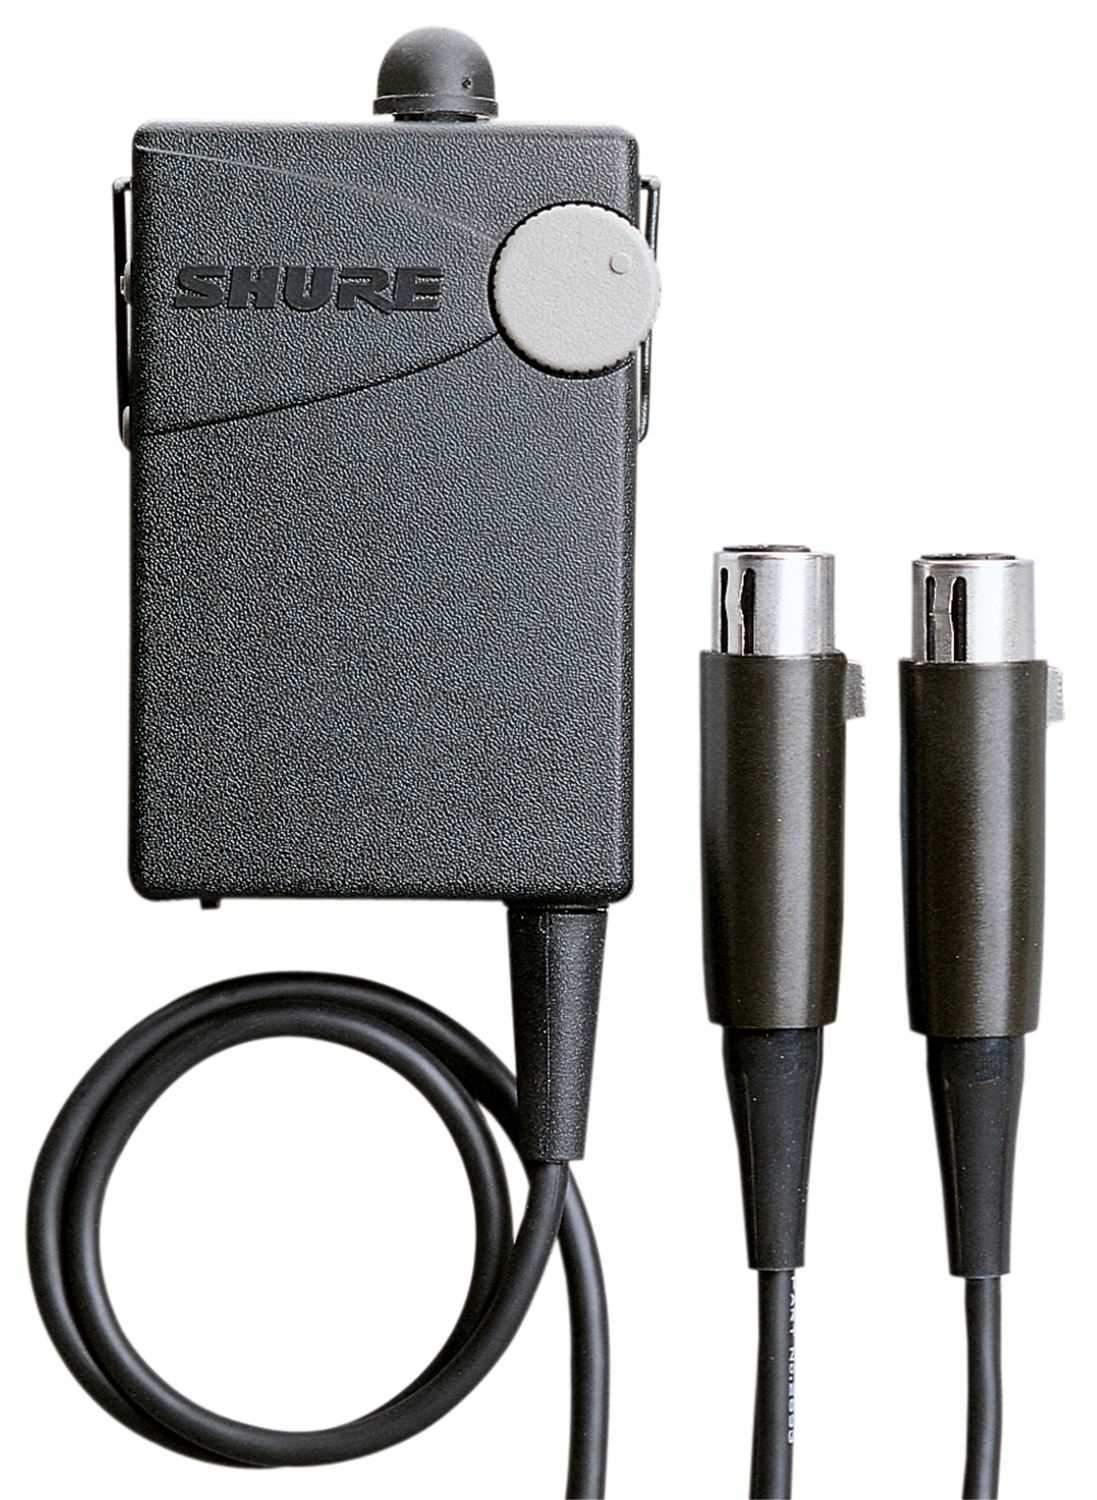 Shure PSM400 Wireless Monitoring Sys with Se115-Cl - PSSL ProSound and Stage Lighting